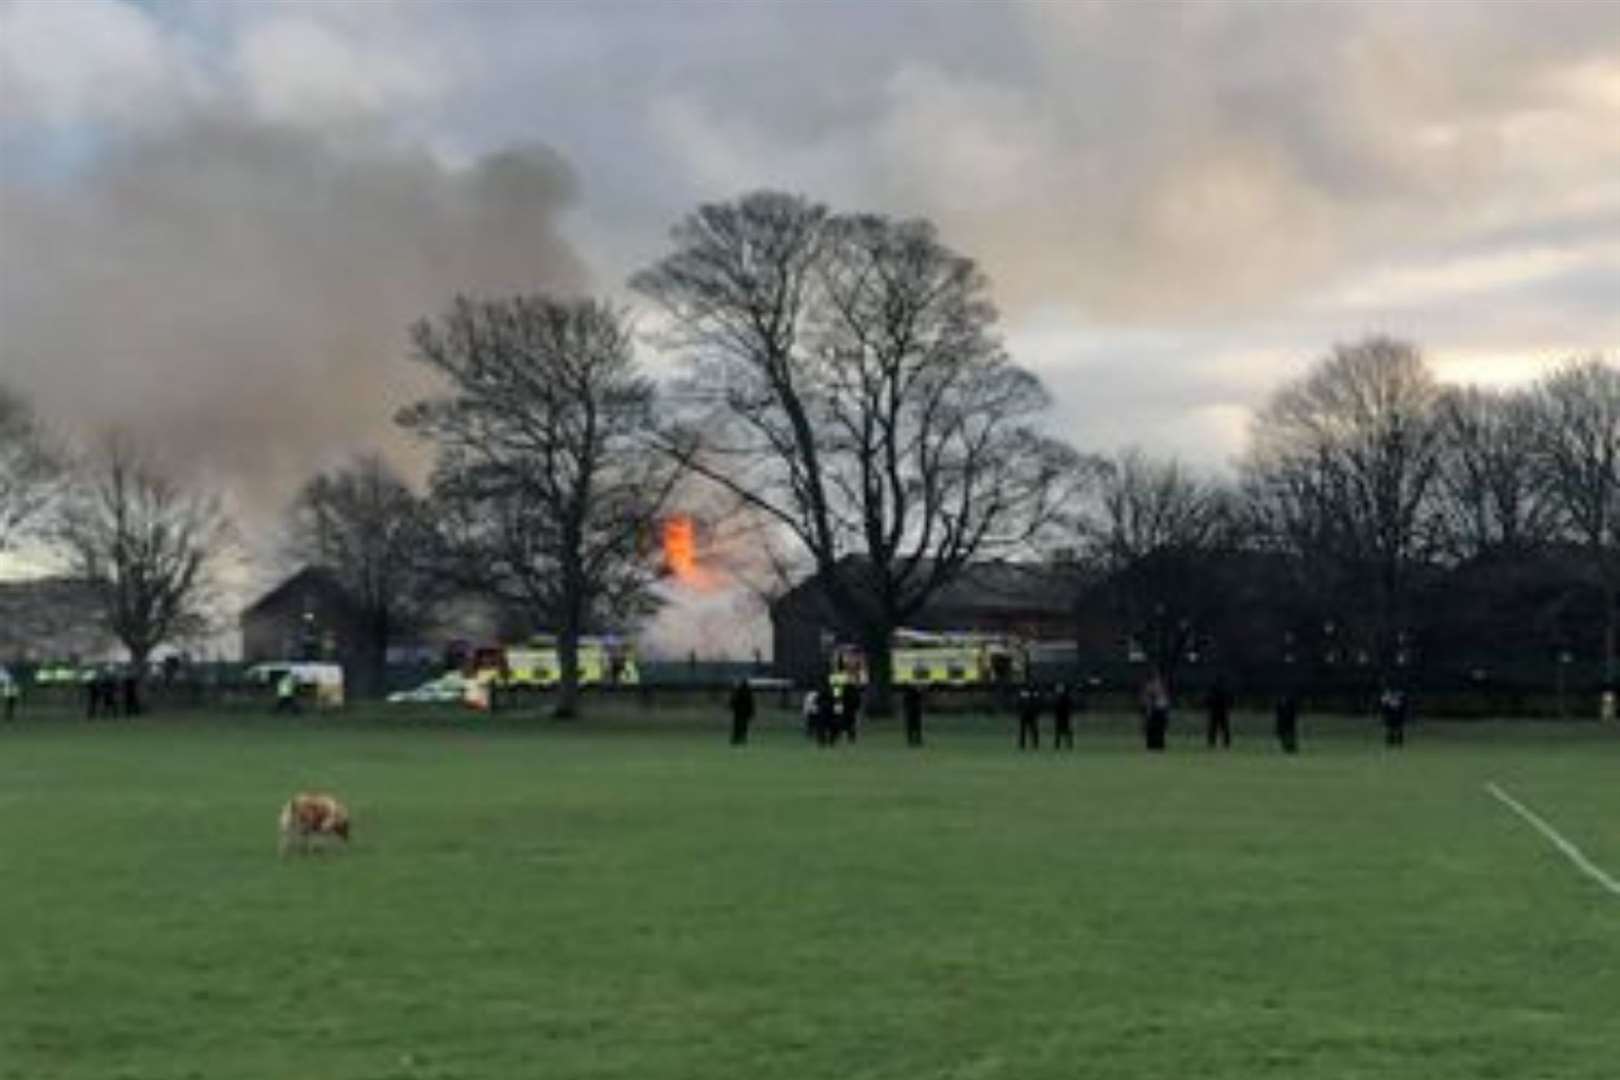 Flames and smoke could be seen shooting out of the barracks